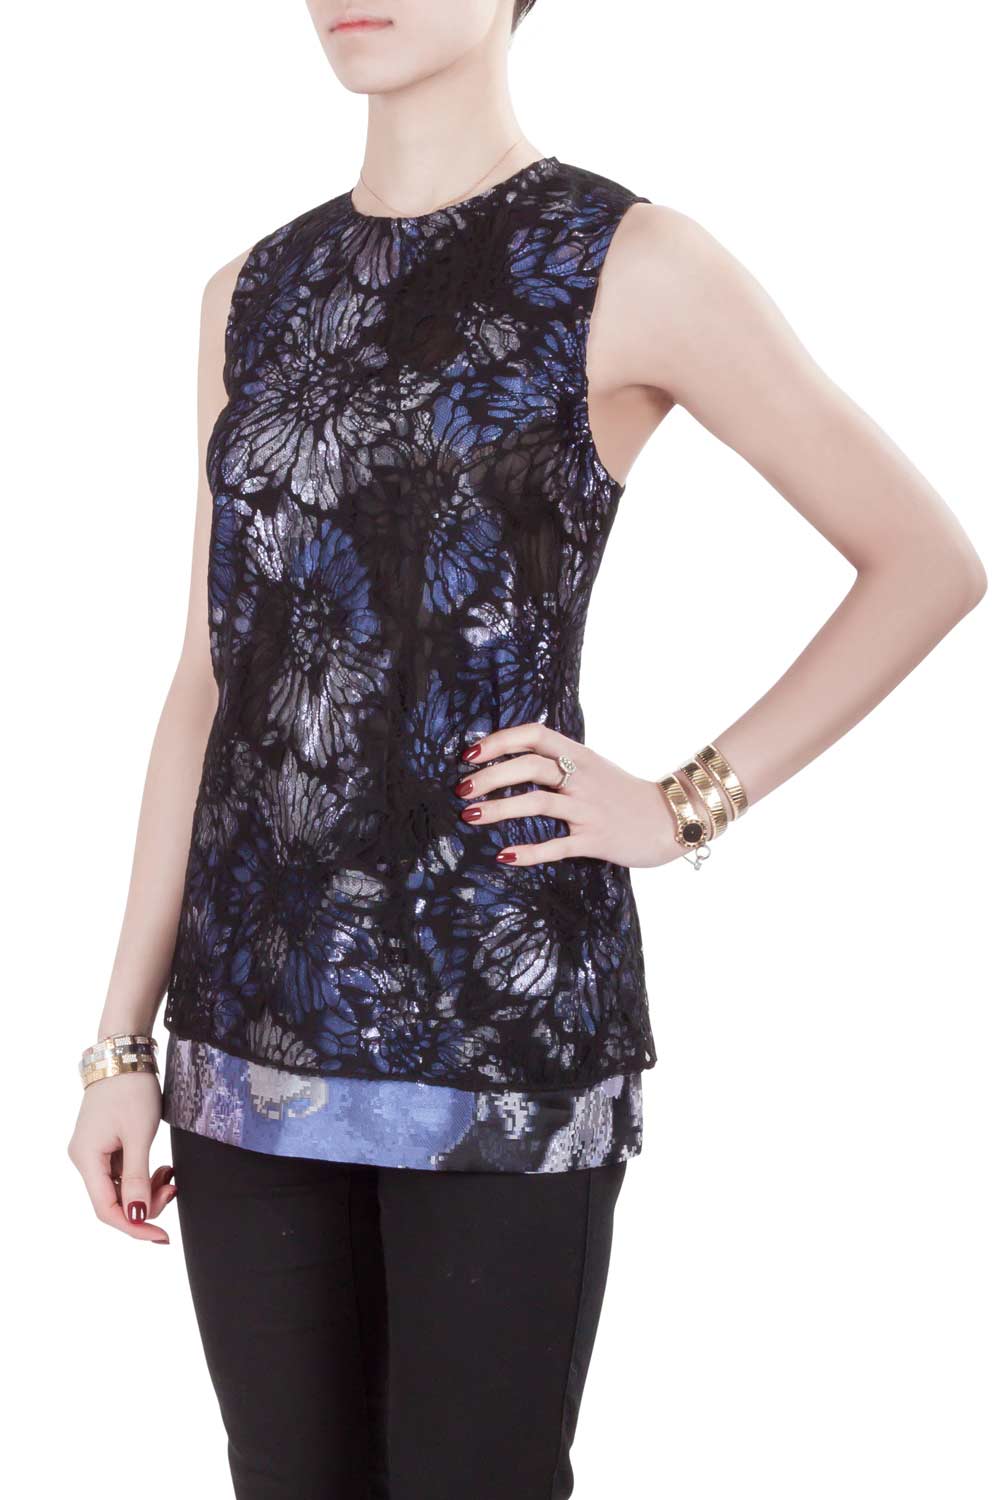 Vera Wang Collection Multicolor Lurex Jacquard Floral Lace Overlay Sleeveless Top M